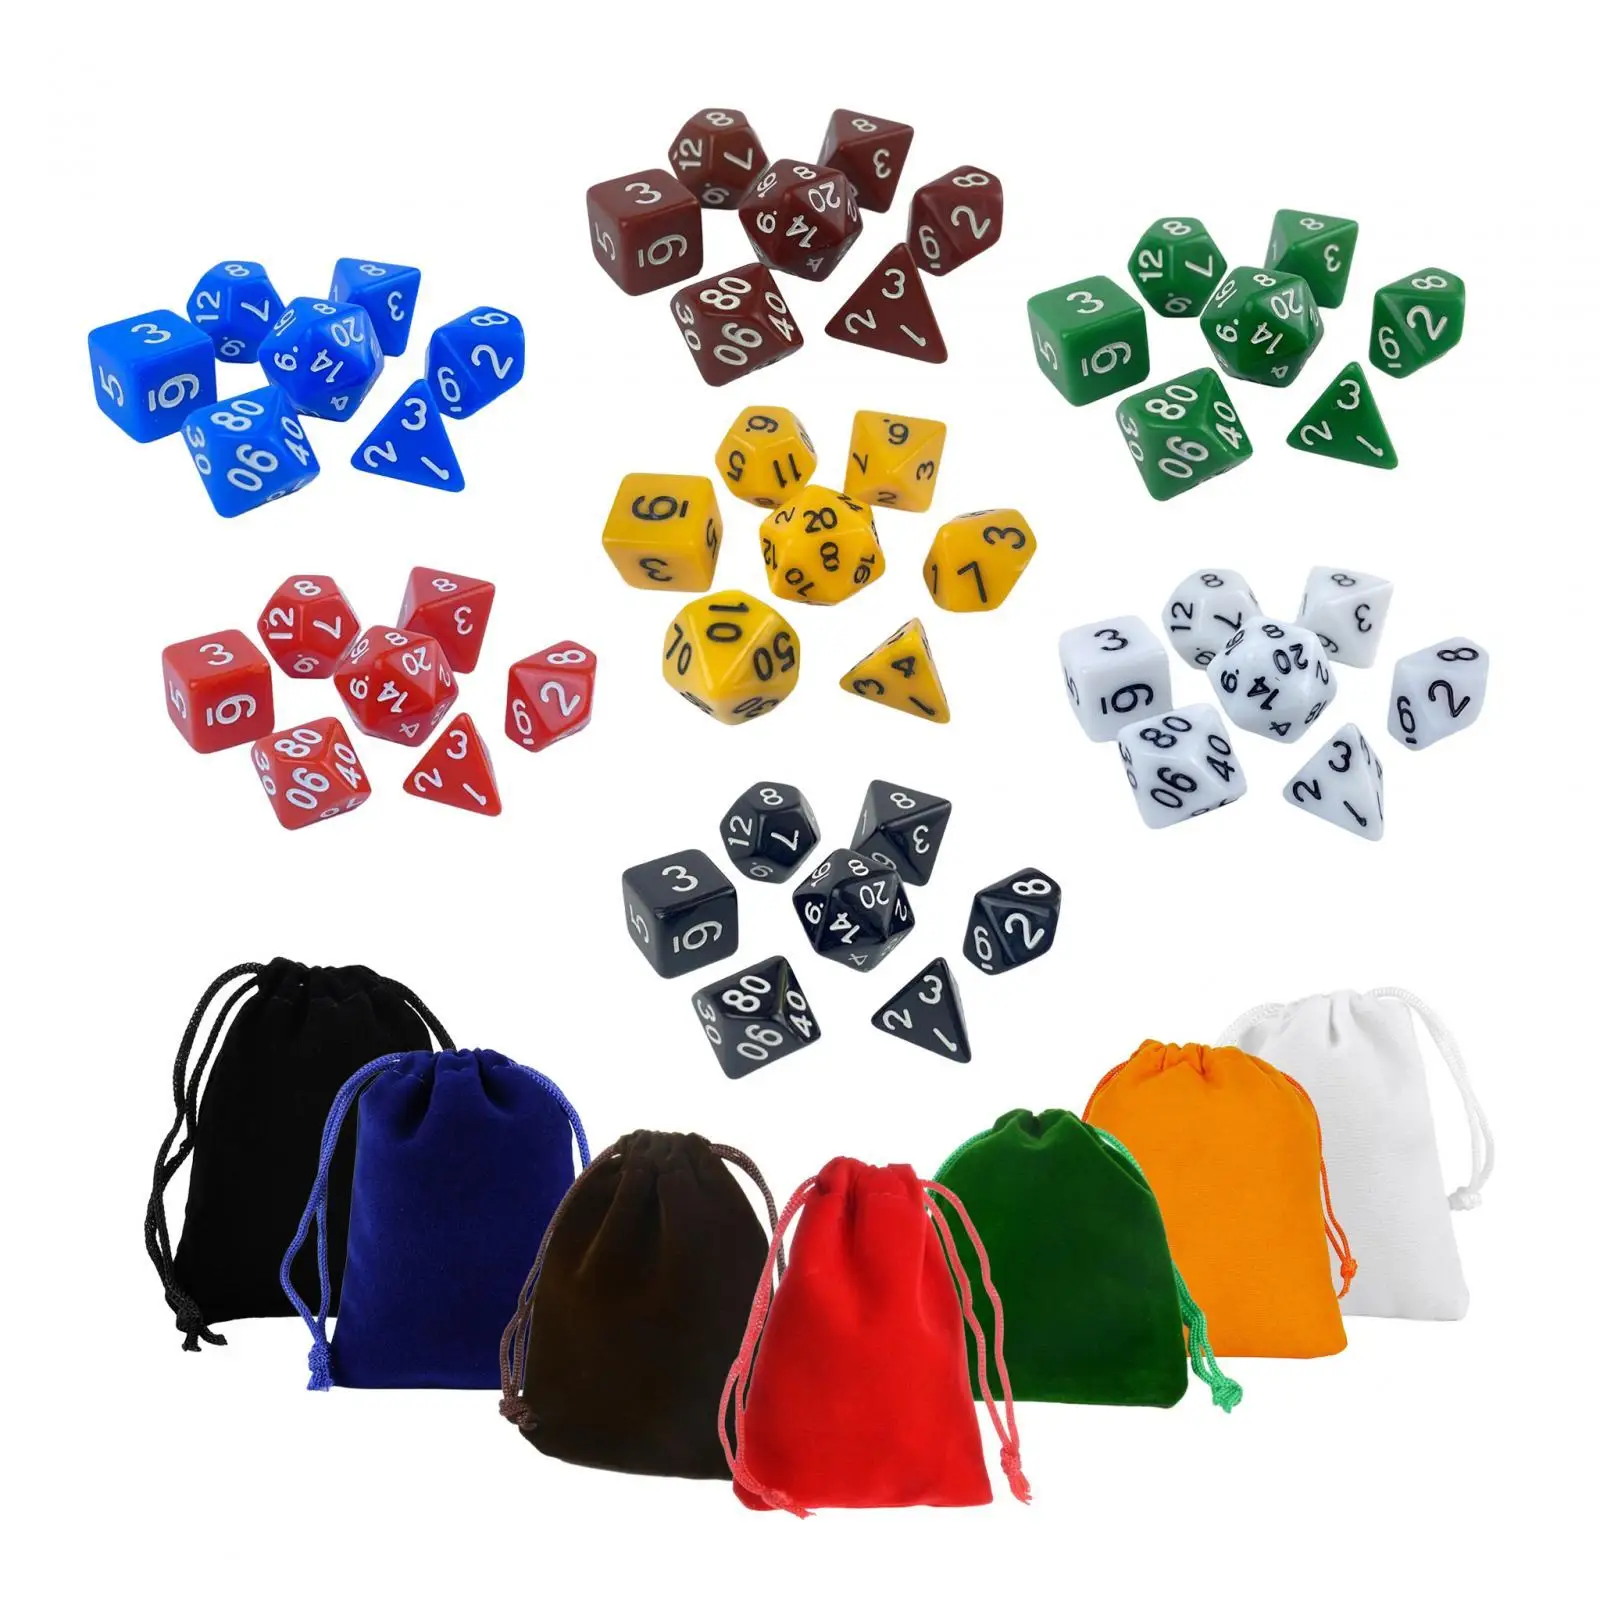 49x Dice Set Game Dices Set Polyhedral Dices with Storage Bag for KTV Board Game